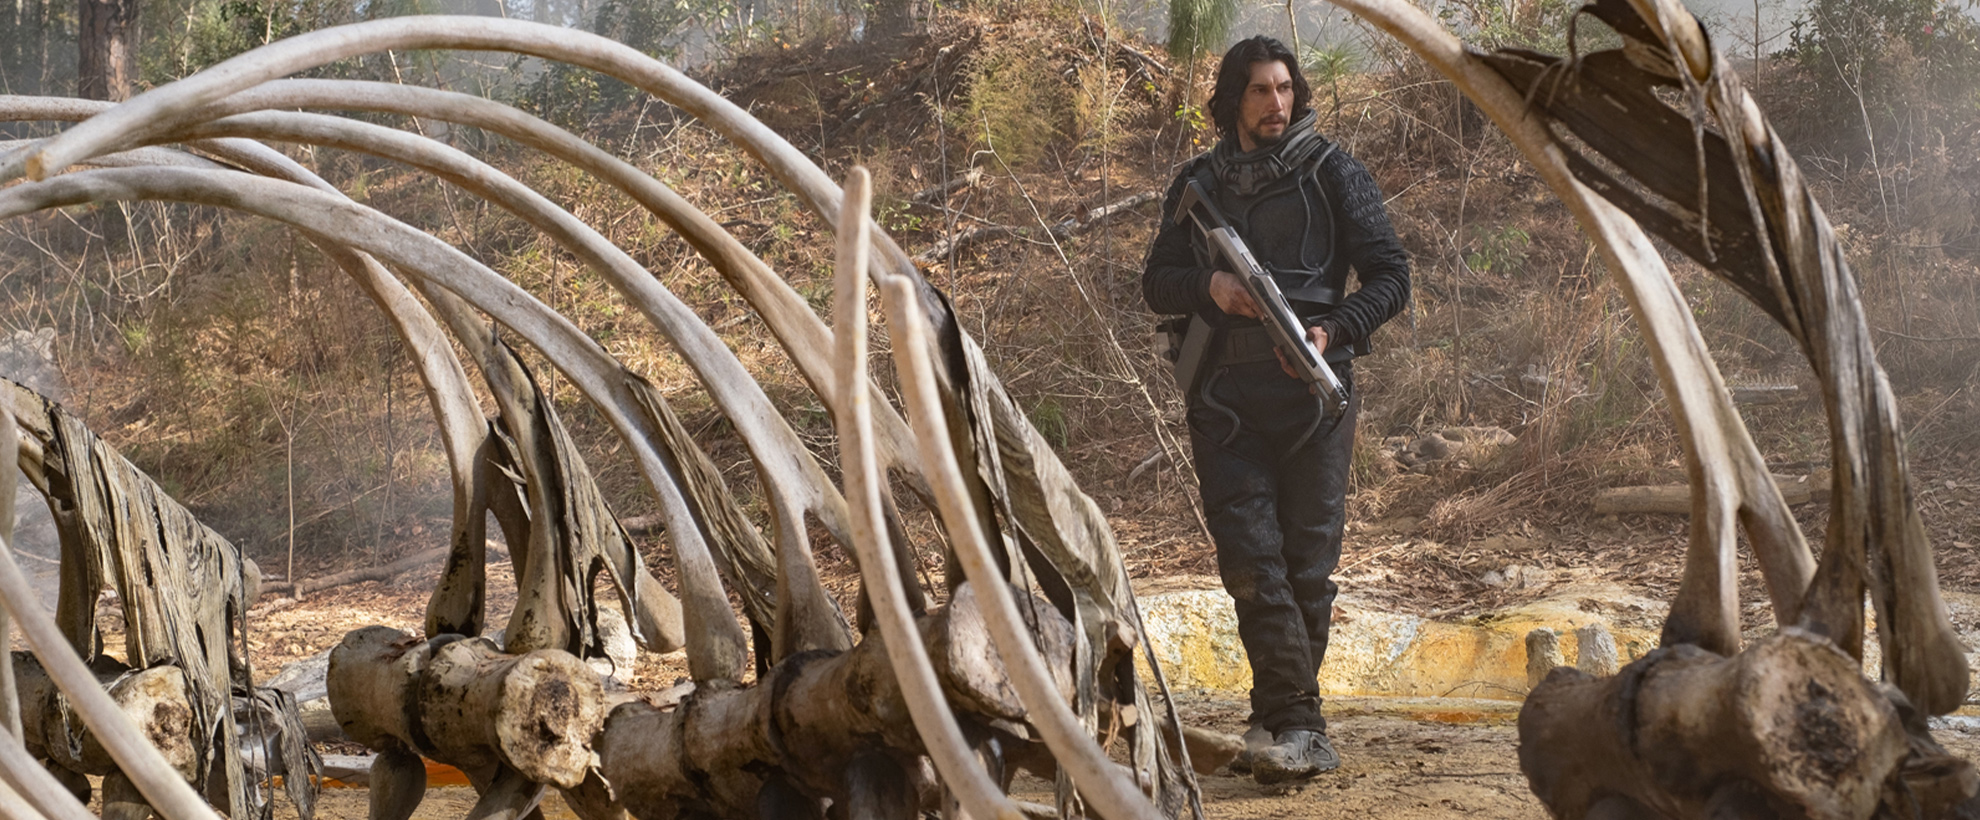 Adam Driver holds a large gun, standing near a large skeleton